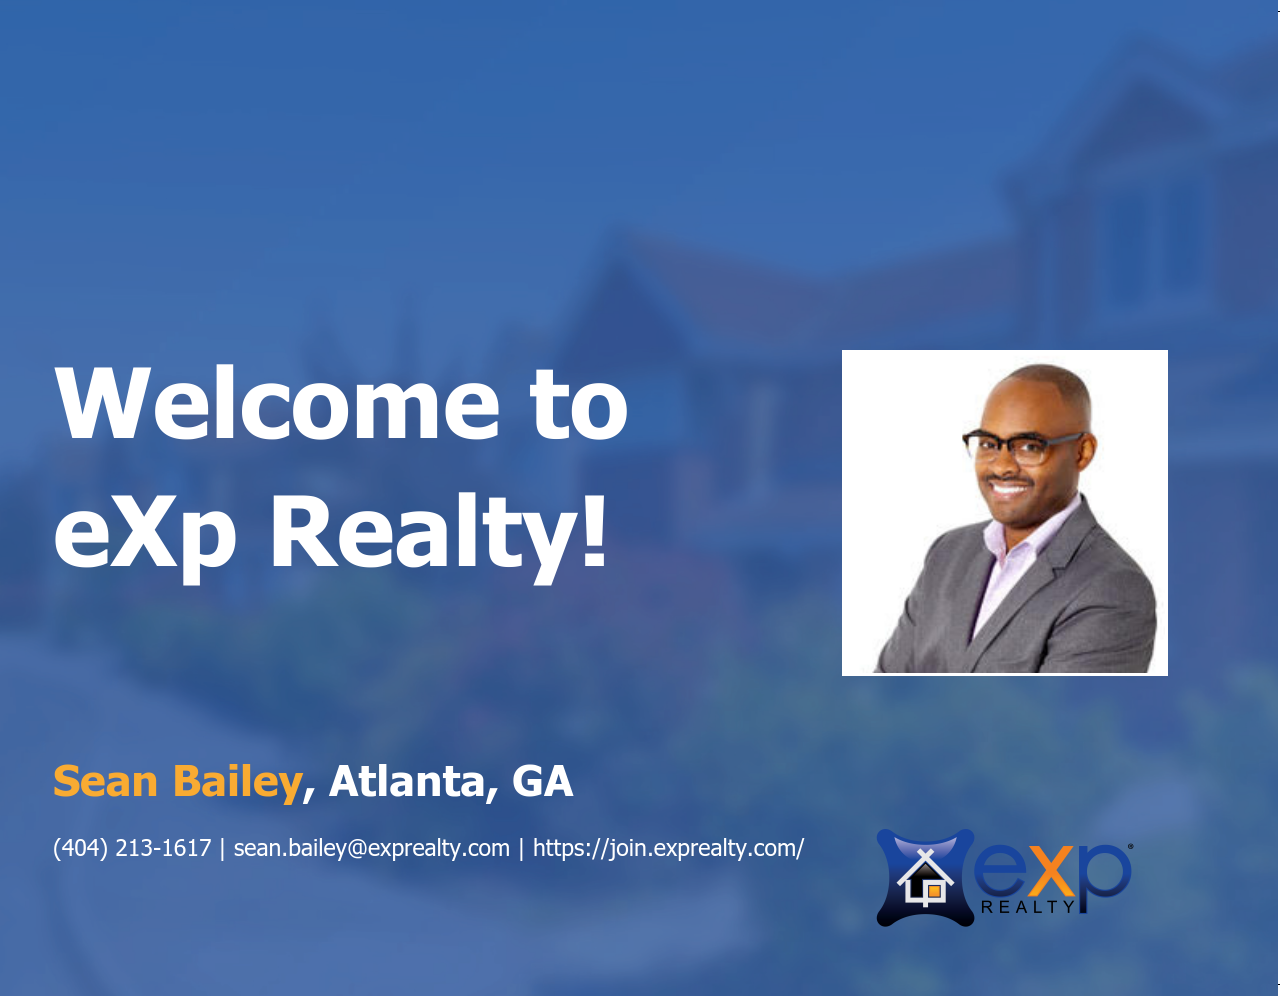 Welcome to eXp Realty Sean Bailey!